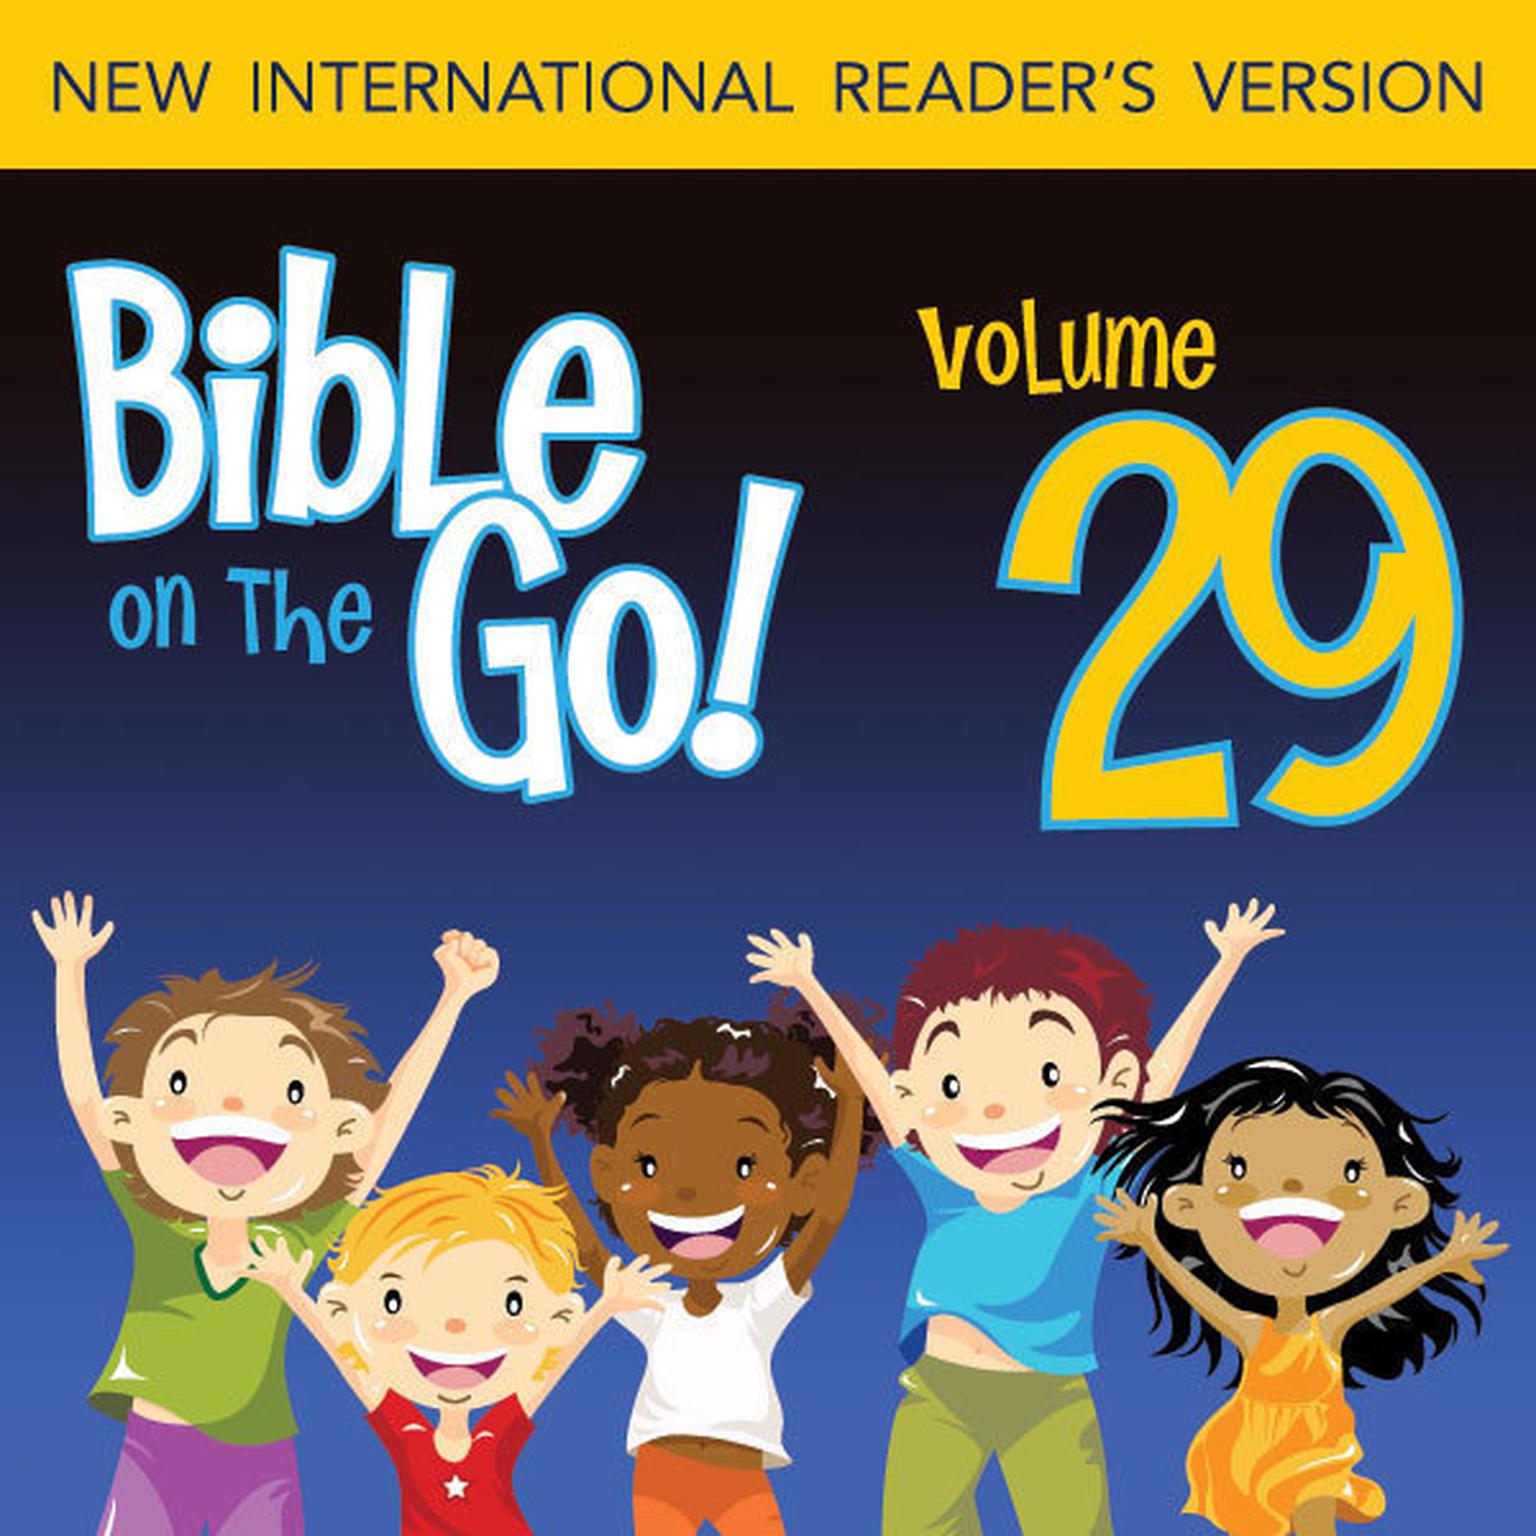 Bible on the Go Audio Bible - New International Readers Version, NIrV: Vol. 29 Teaching About Wisdom (Proverbs 1-3, 15, 22, 24; Ecclesiastes 1-3, 12): Teaching About Wisdom Audiobook, by Zondervan